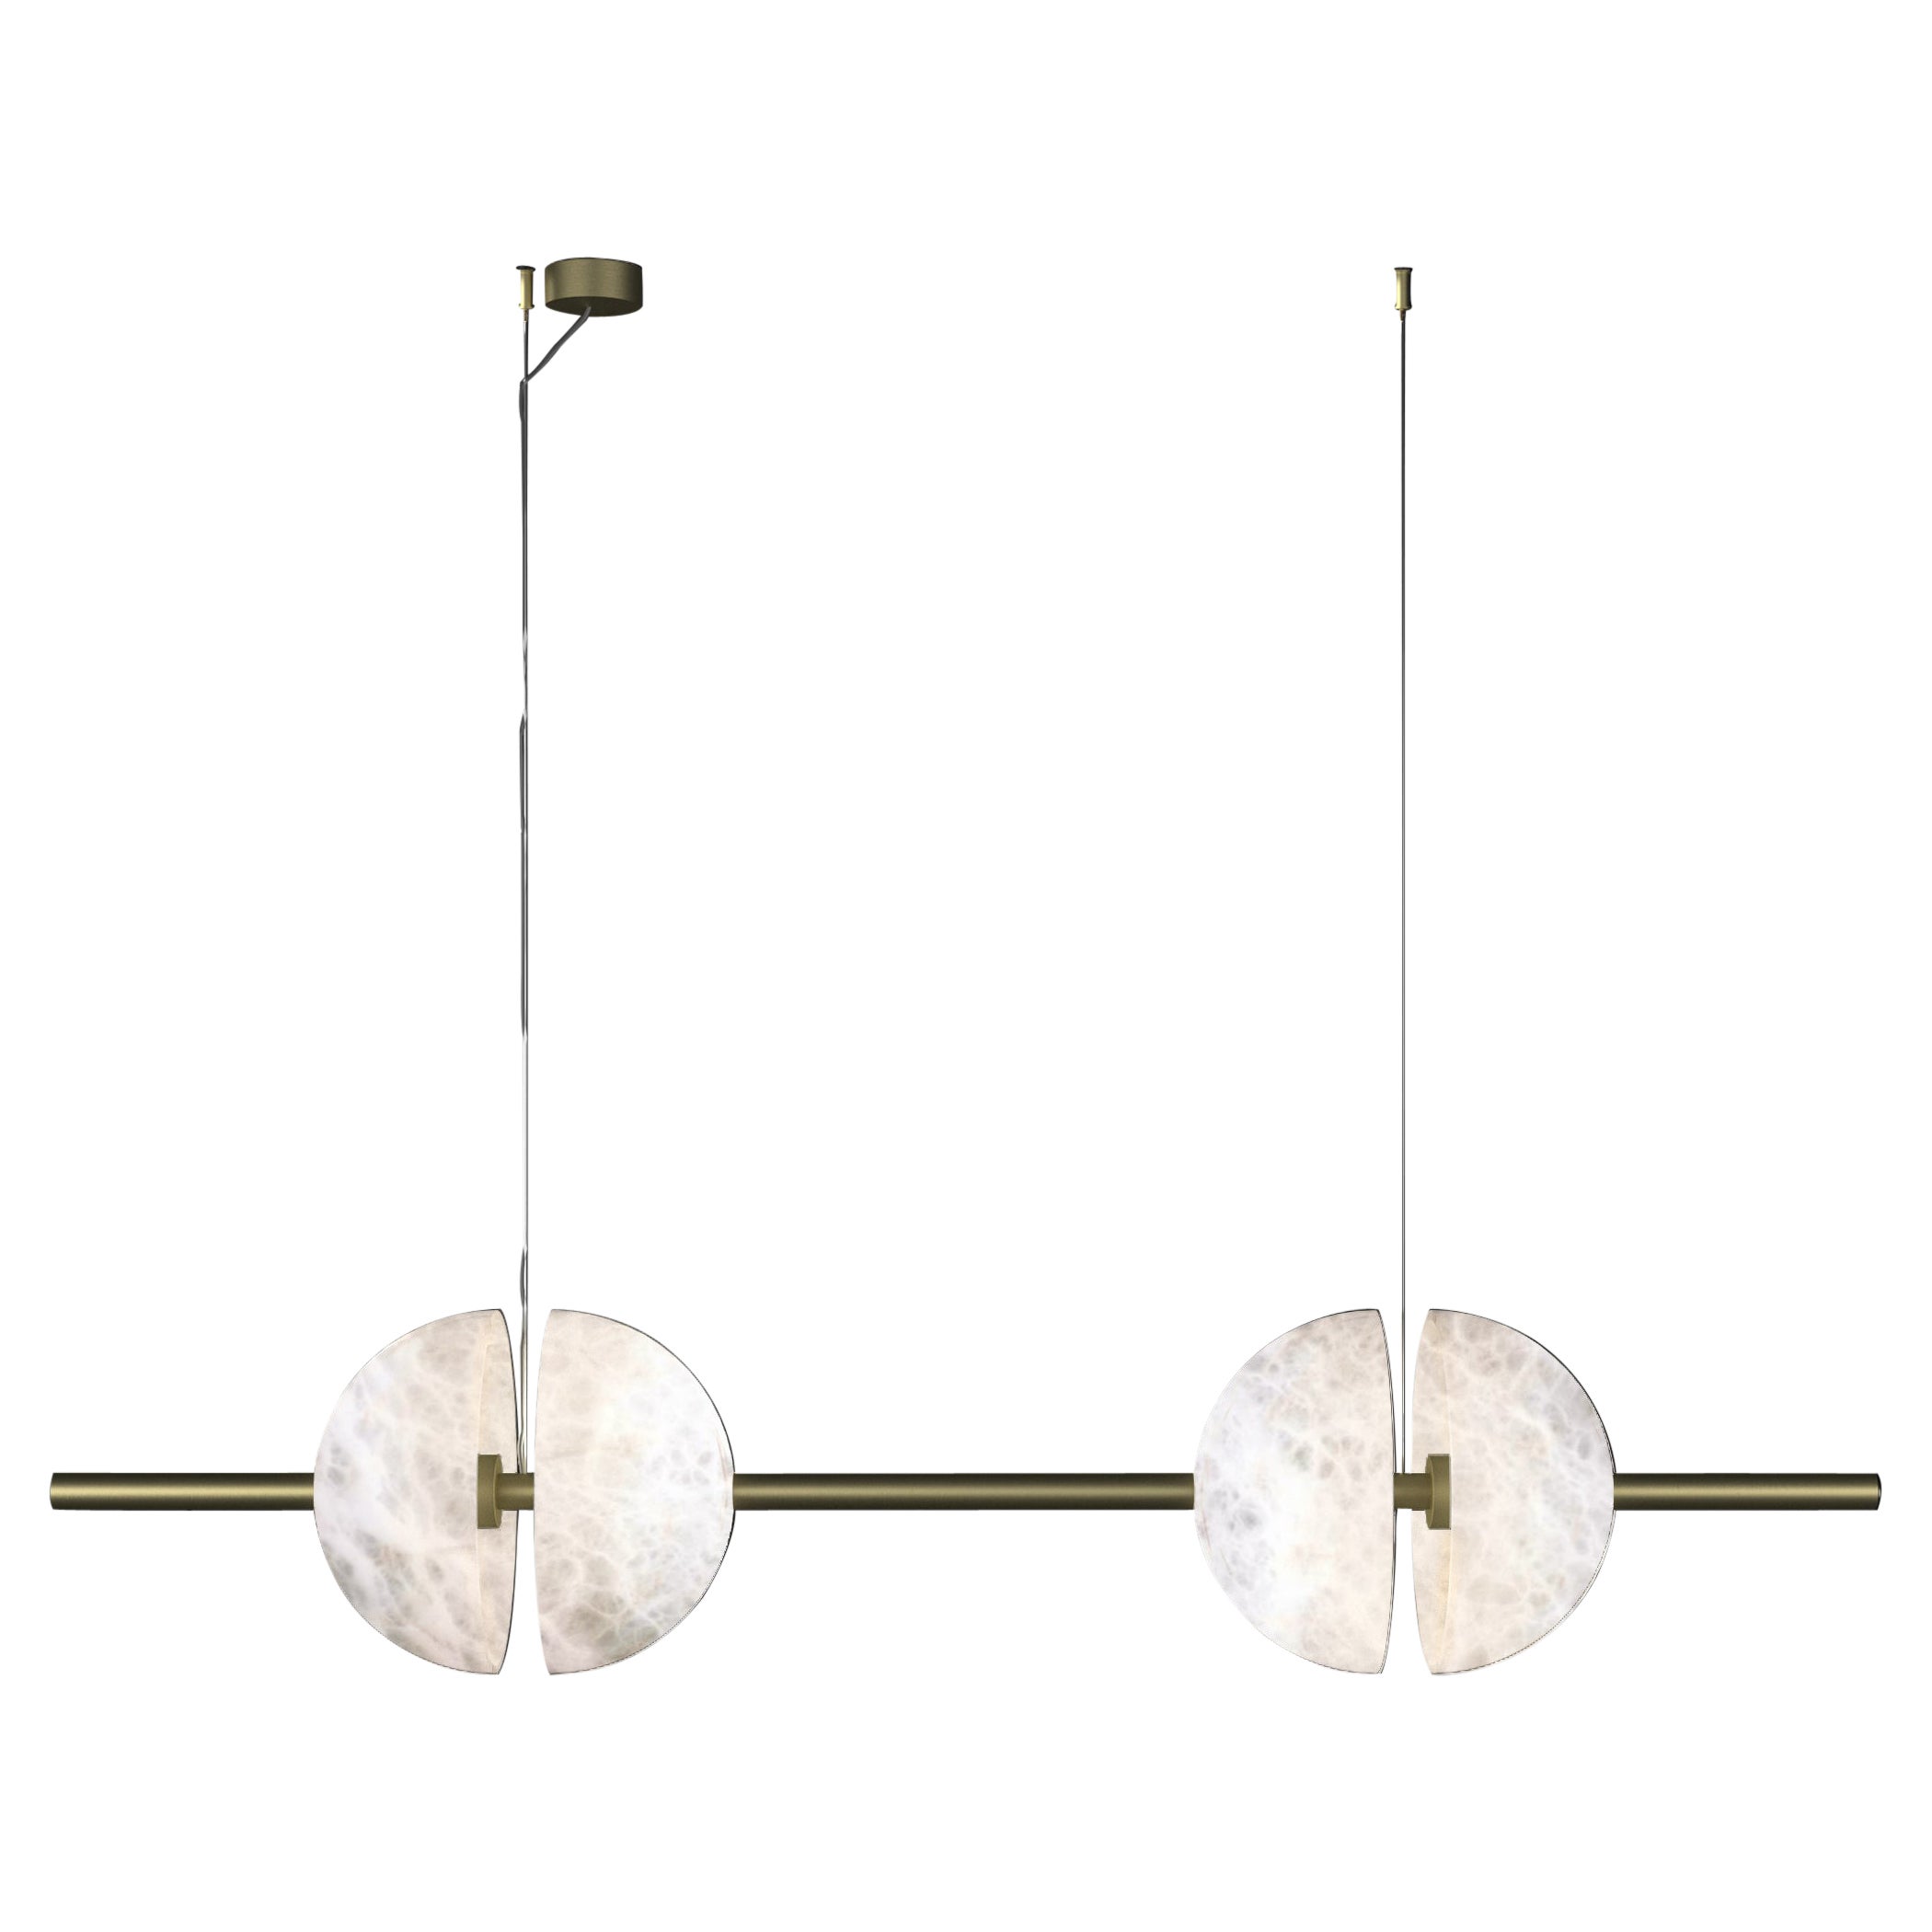 Ermes Brushed Brass And Alabaster Pendant Light 1 by Alabastro Italiano For Sale